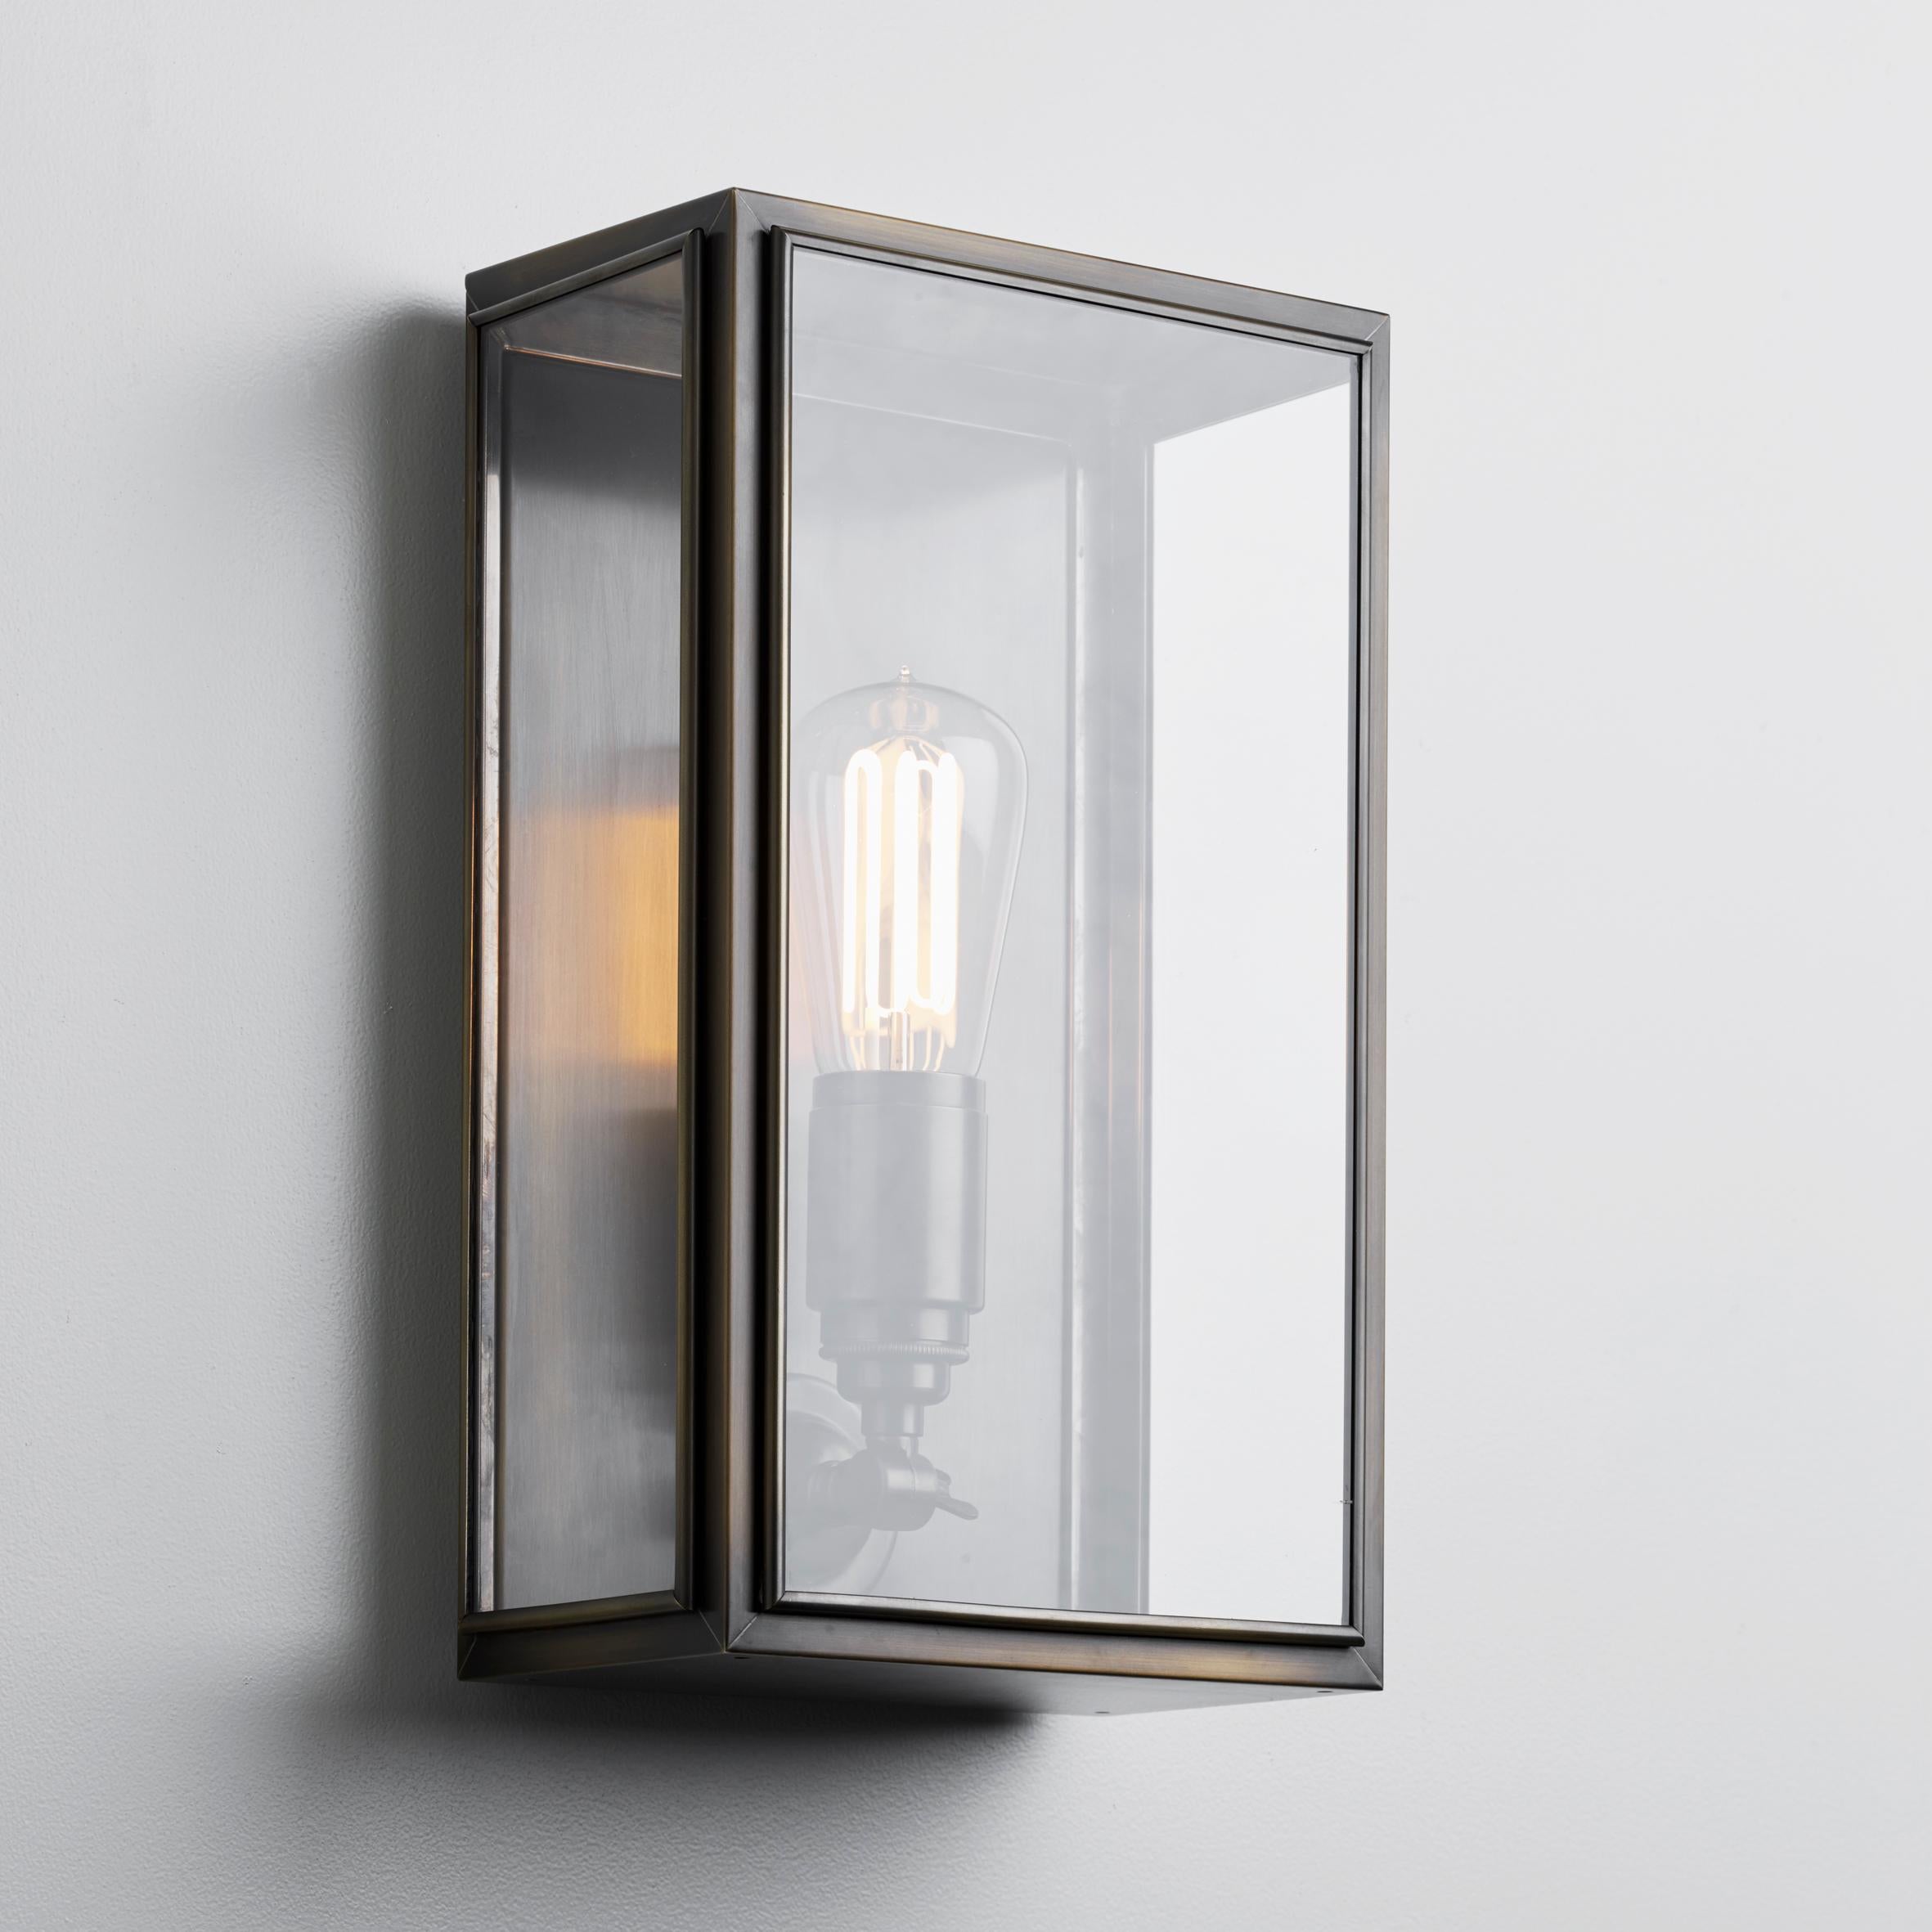 Wall light in brass lacquered in color with outside fitted clear or frosted glass and spring closure. For indoor and outdoor use (IP44).

Caret squirrel cage lamp 230V E27 7,7W 2300K. Main power 230V 50Hz.